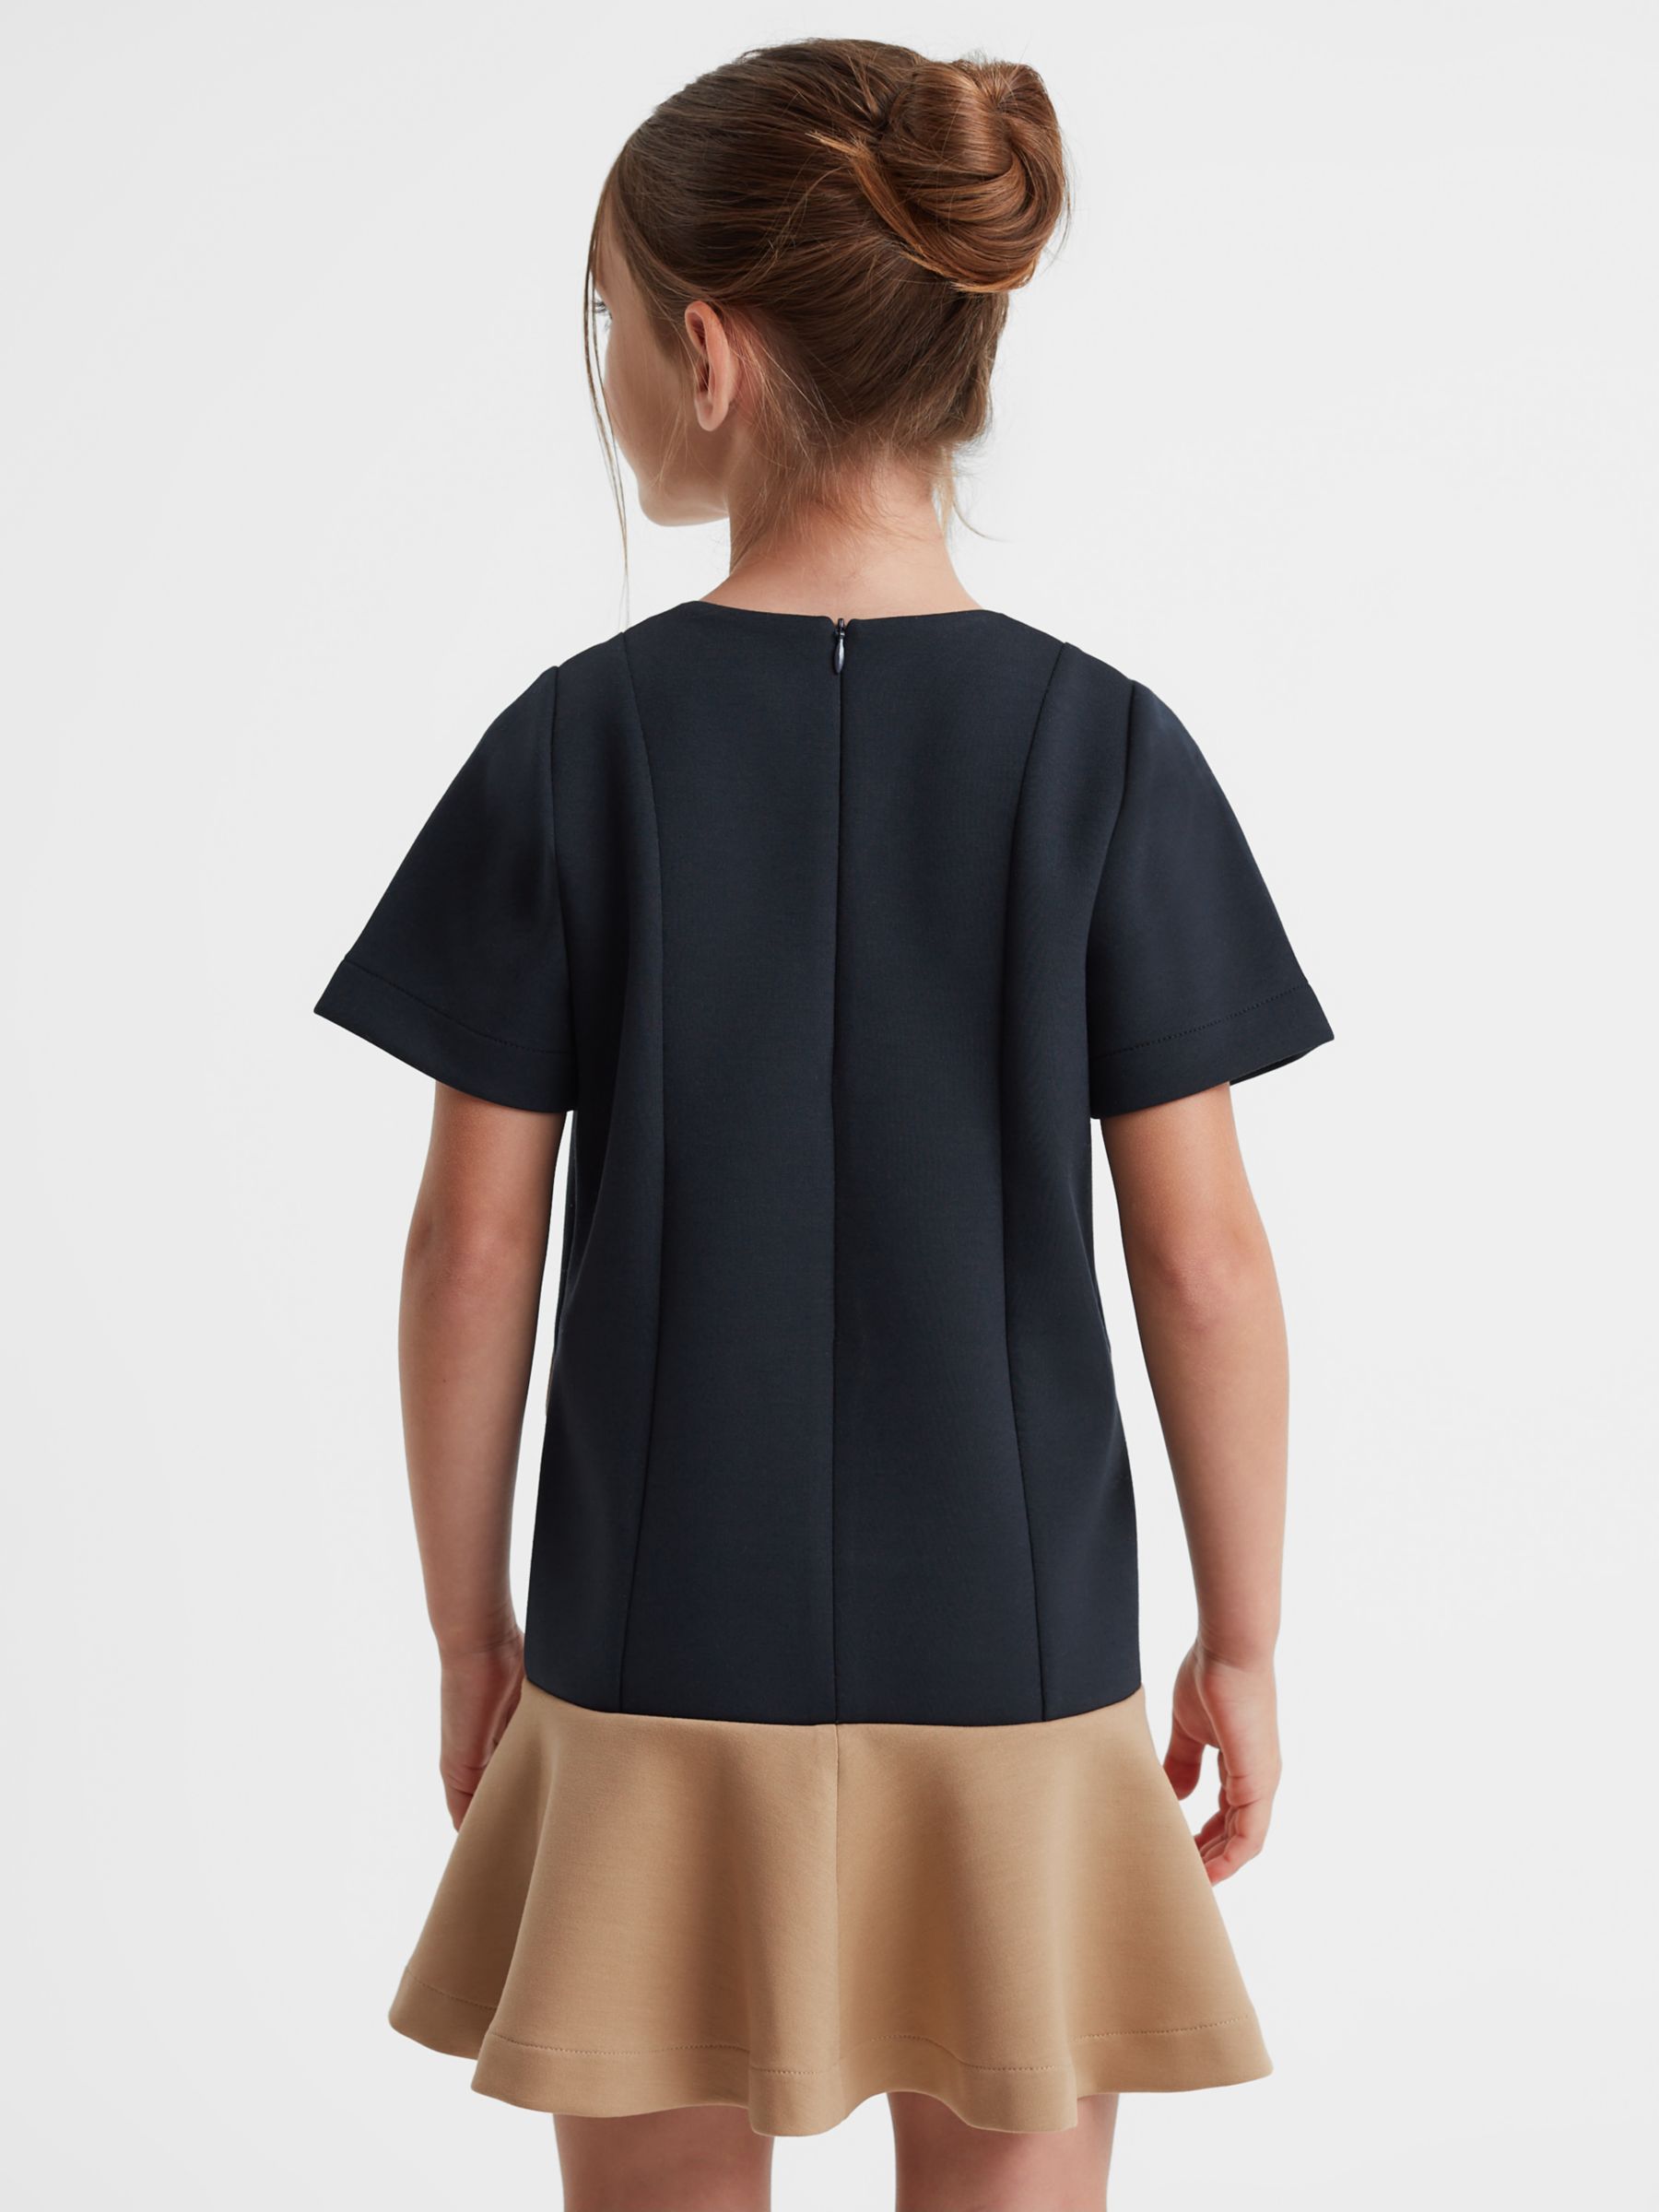 Reiss Kids' Fion Colour Block Flared Dress, Navy/Neutral, 4-5 years